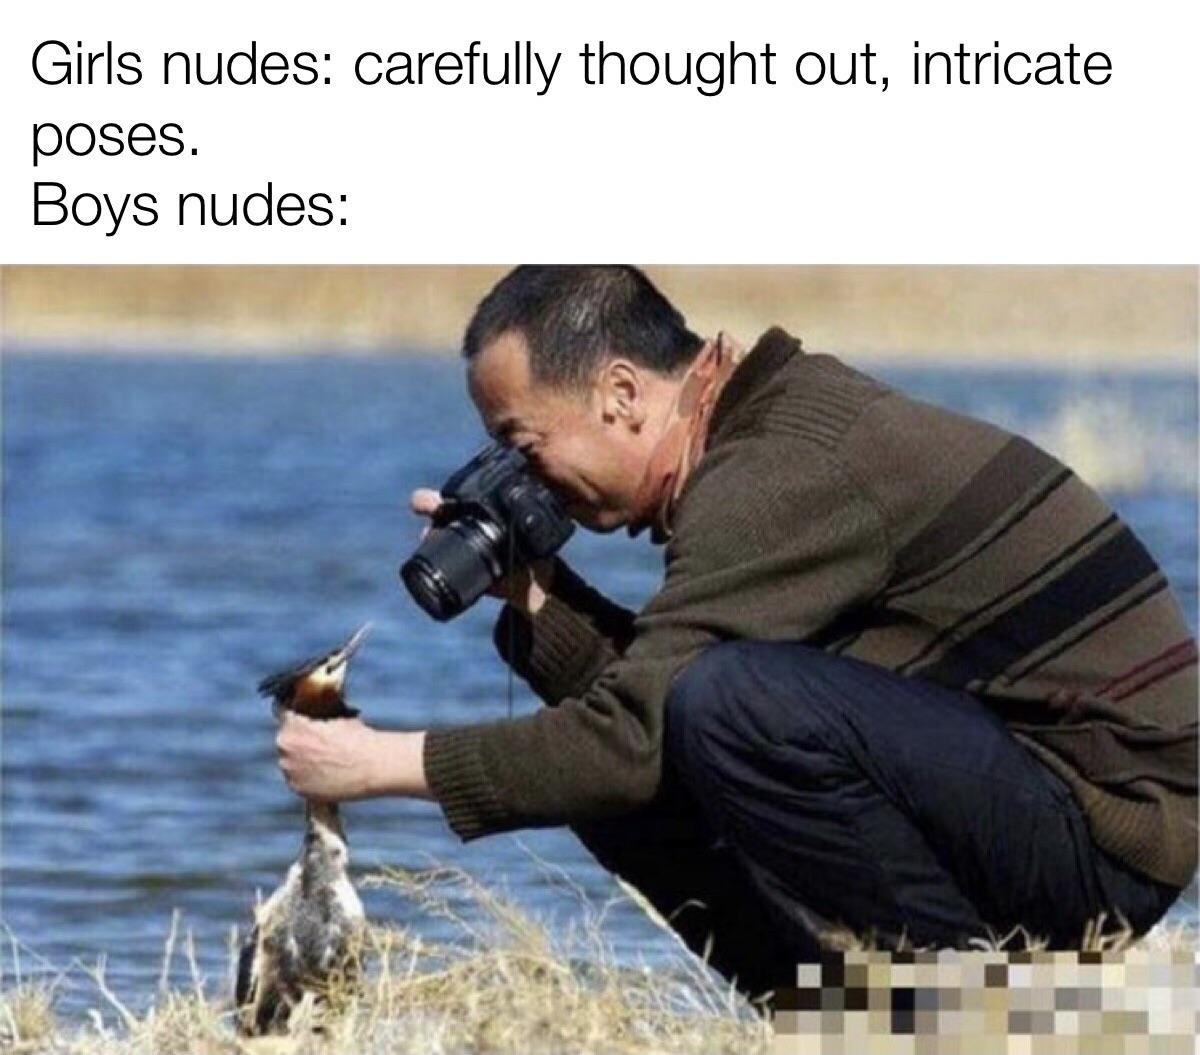 bird photographer - Girls nudes carefully thought out, intricate poses. Boys nudes